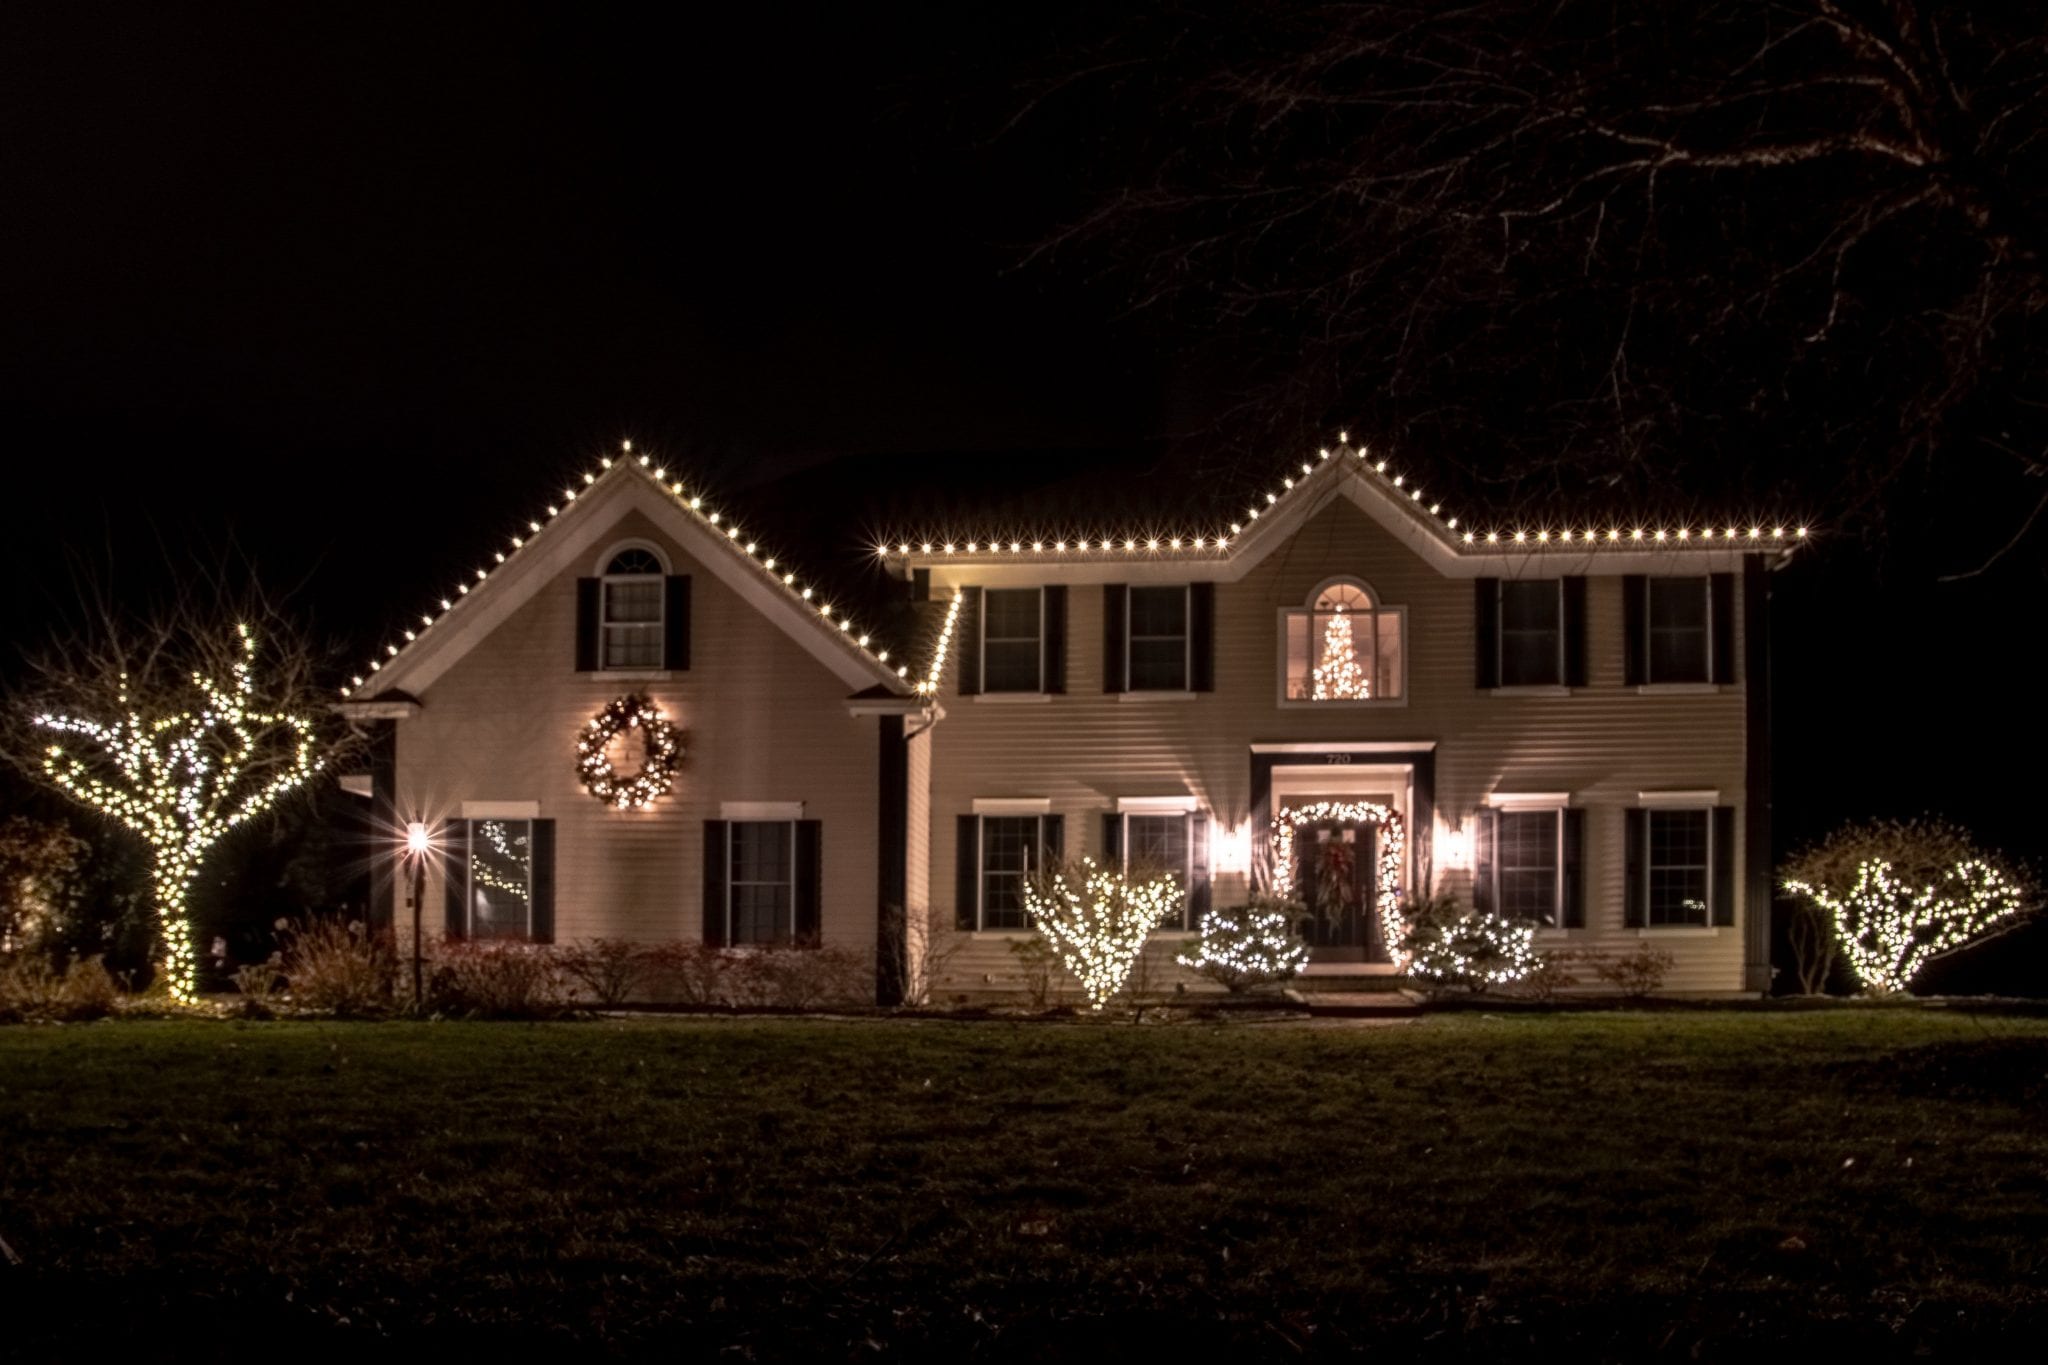 Latham NY home decorated for the holidays with thousands of white led lights